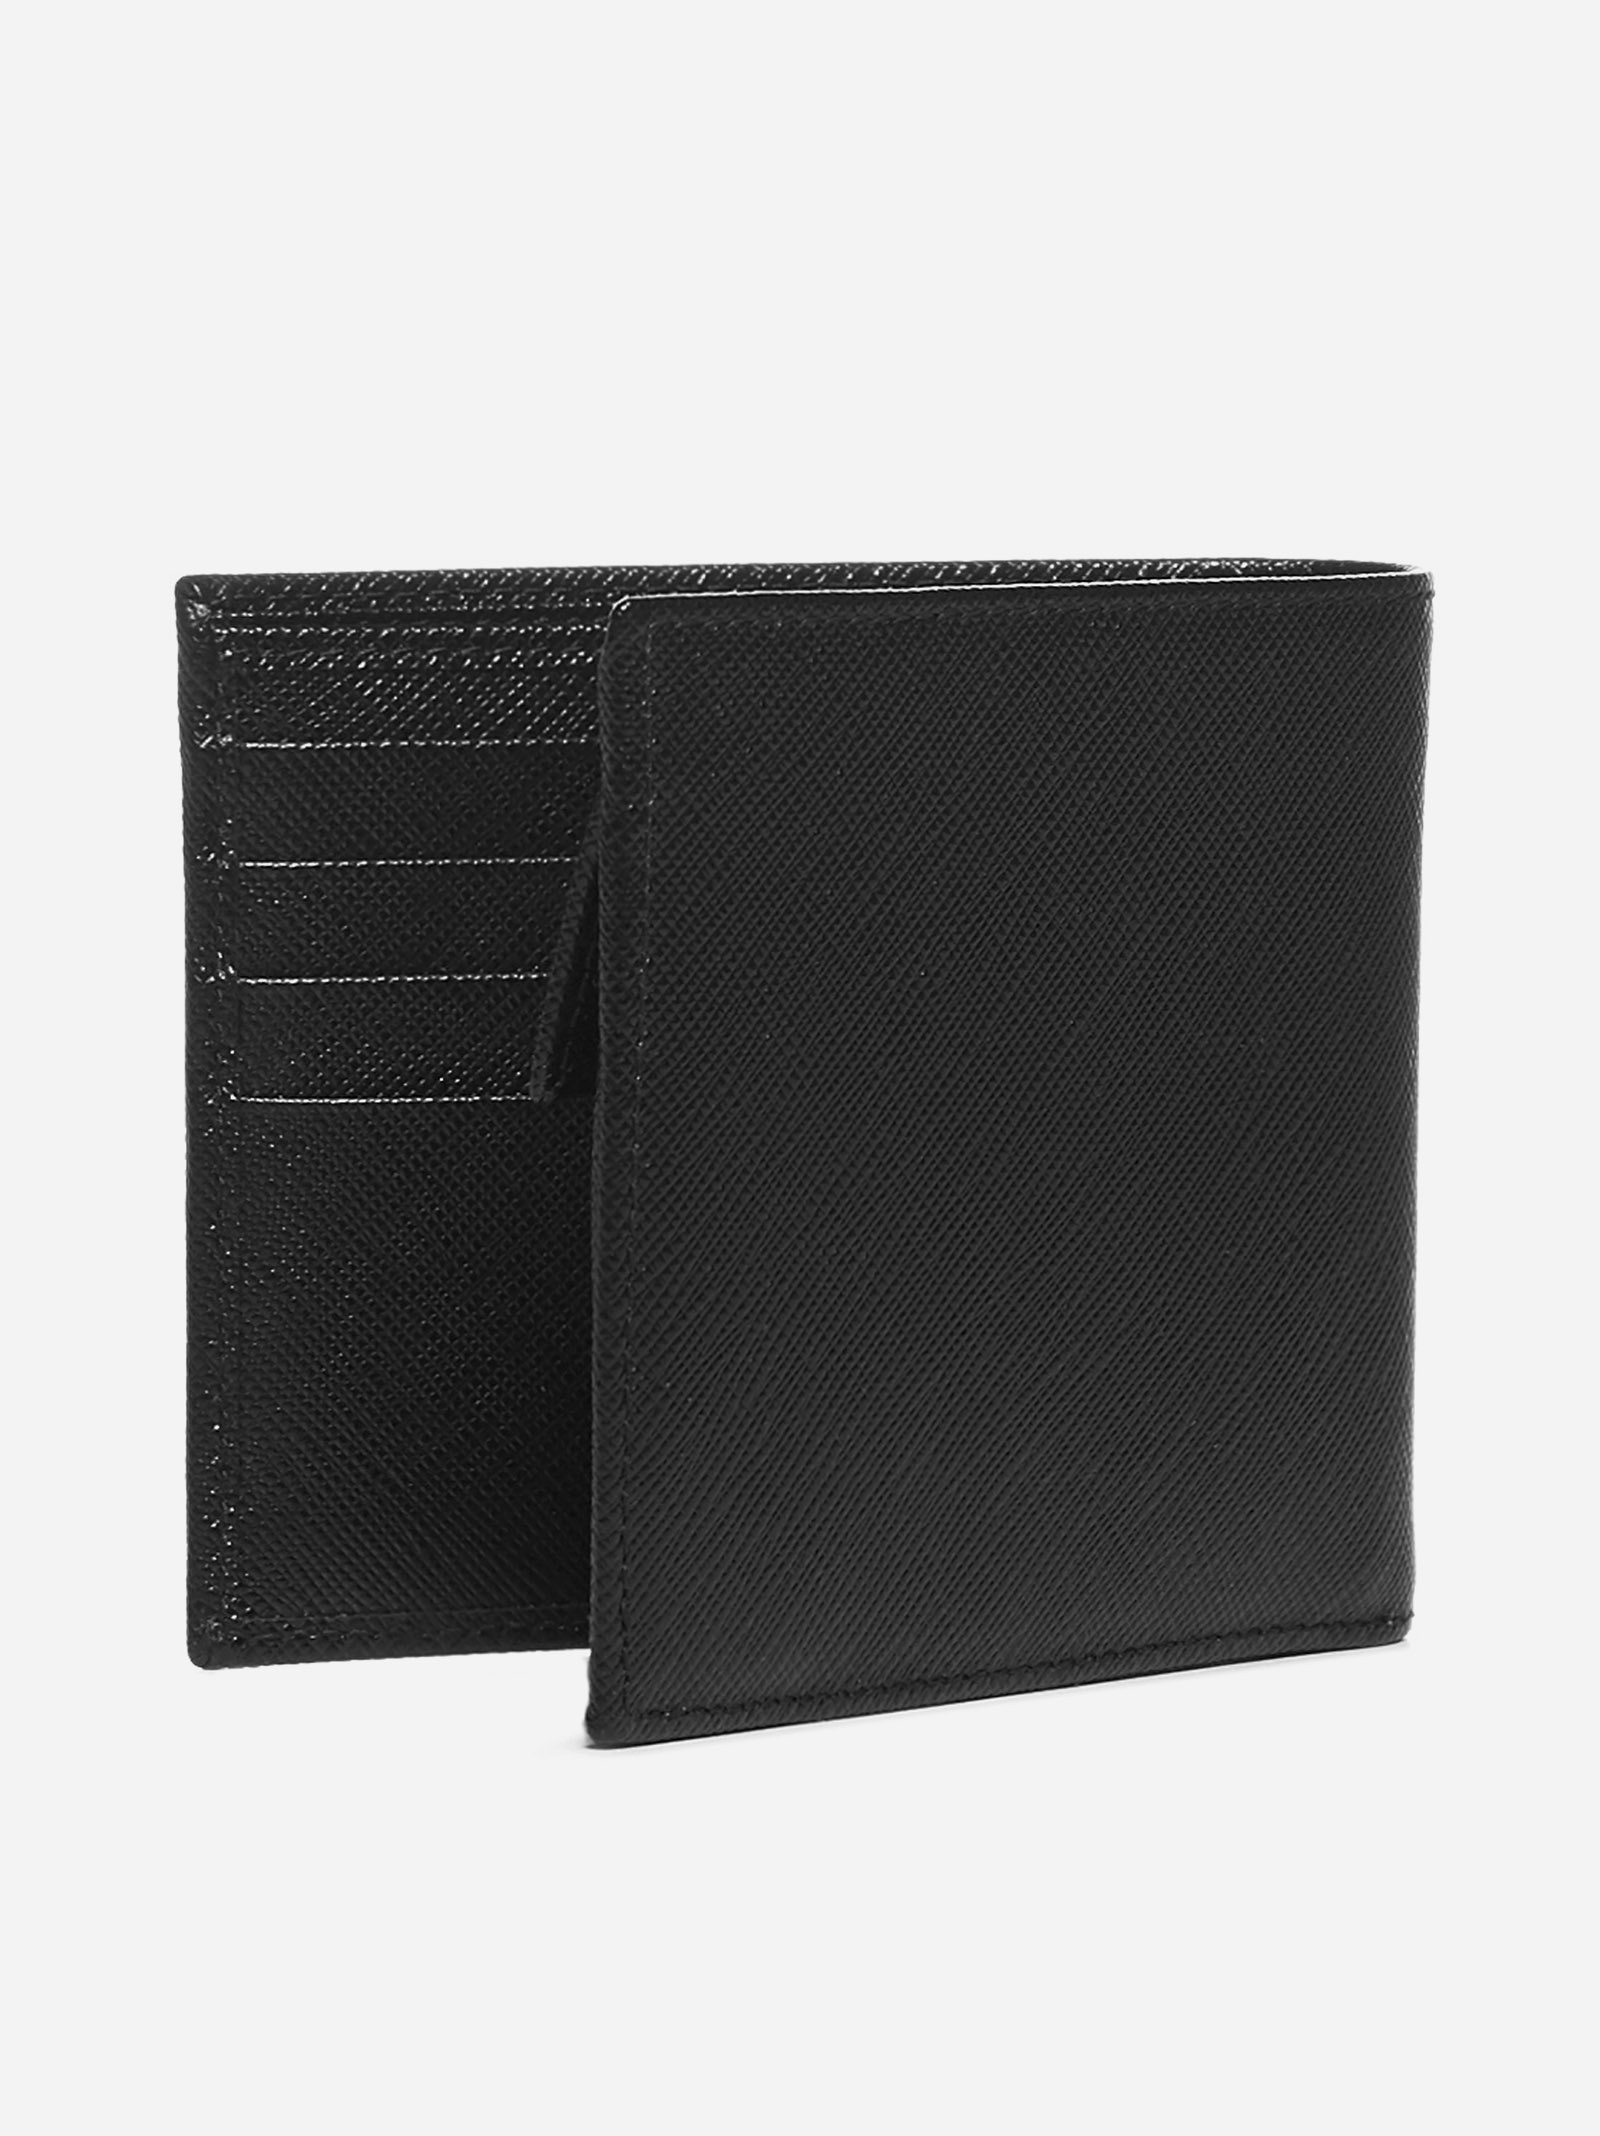 Saffiano leather bifold wallet - 3